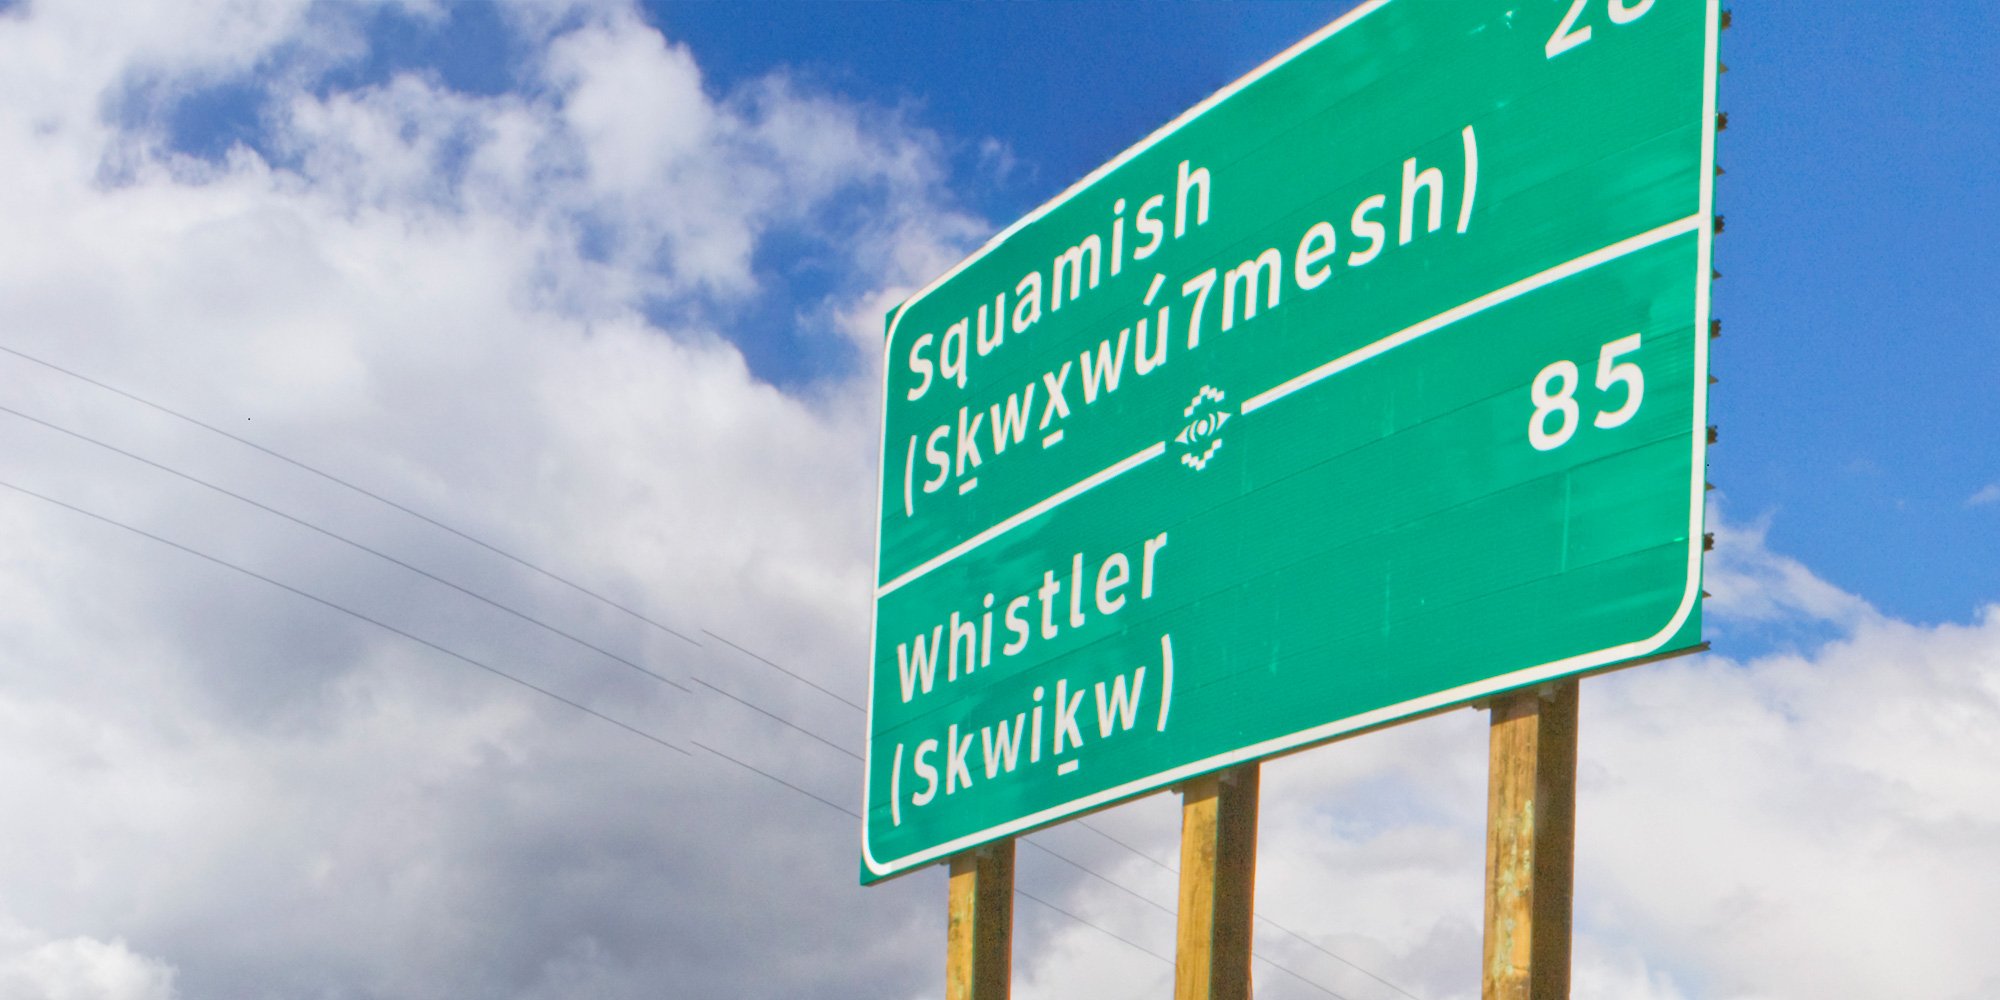 Squamish and Whistler road sign with Indigenous names